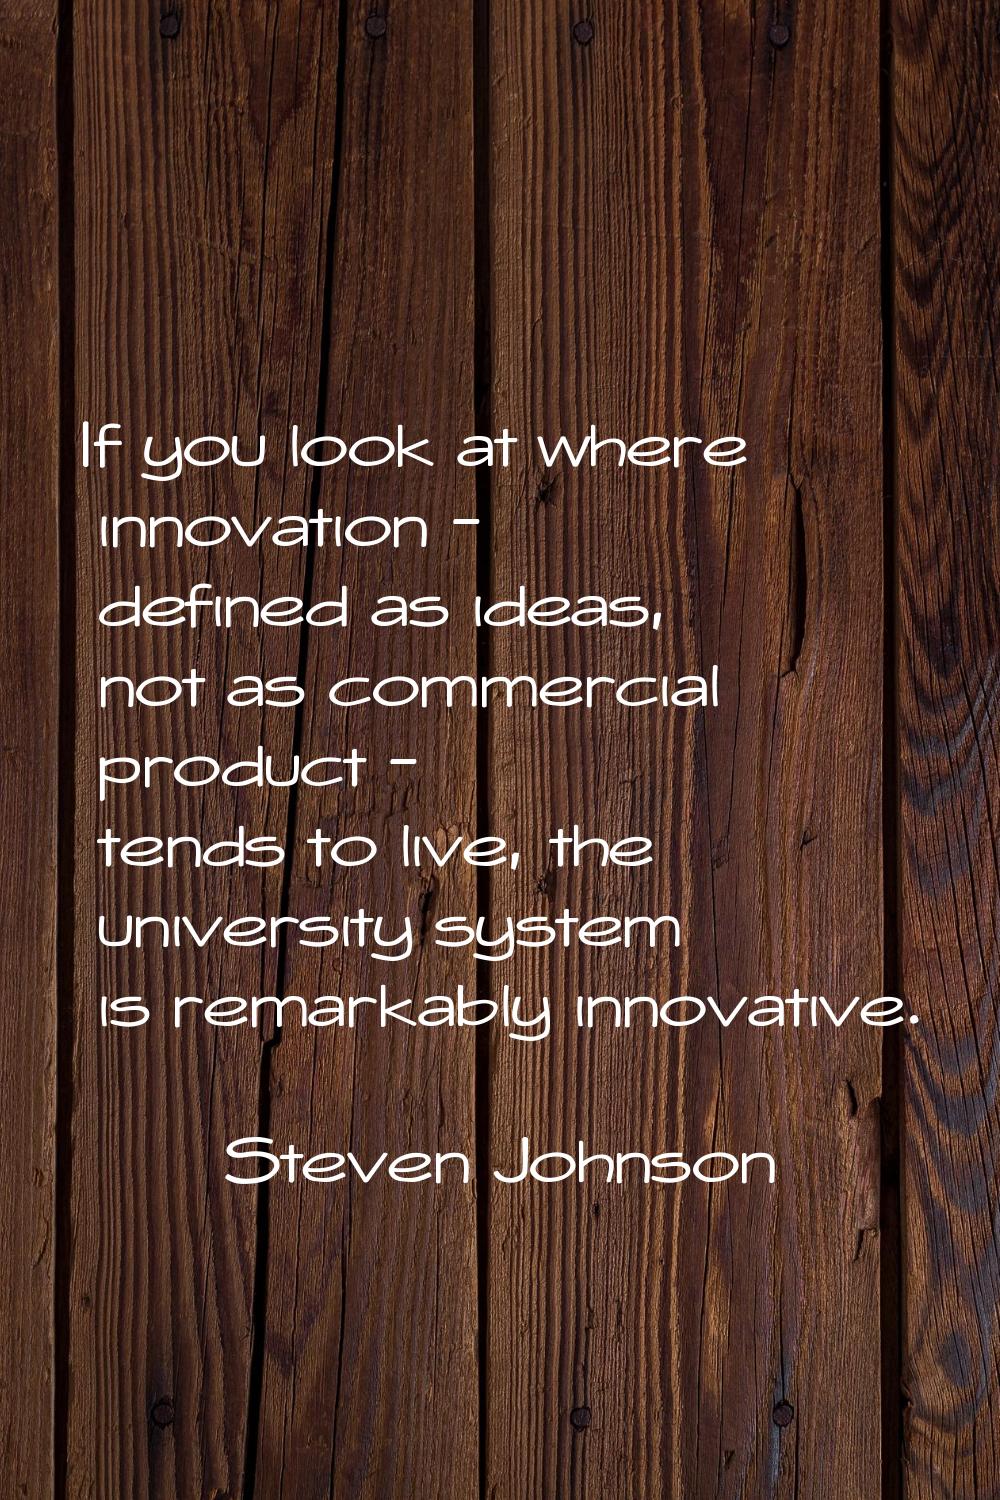 If you look at where innovation - defined as ideas, not as commercial product - tends to live, the 